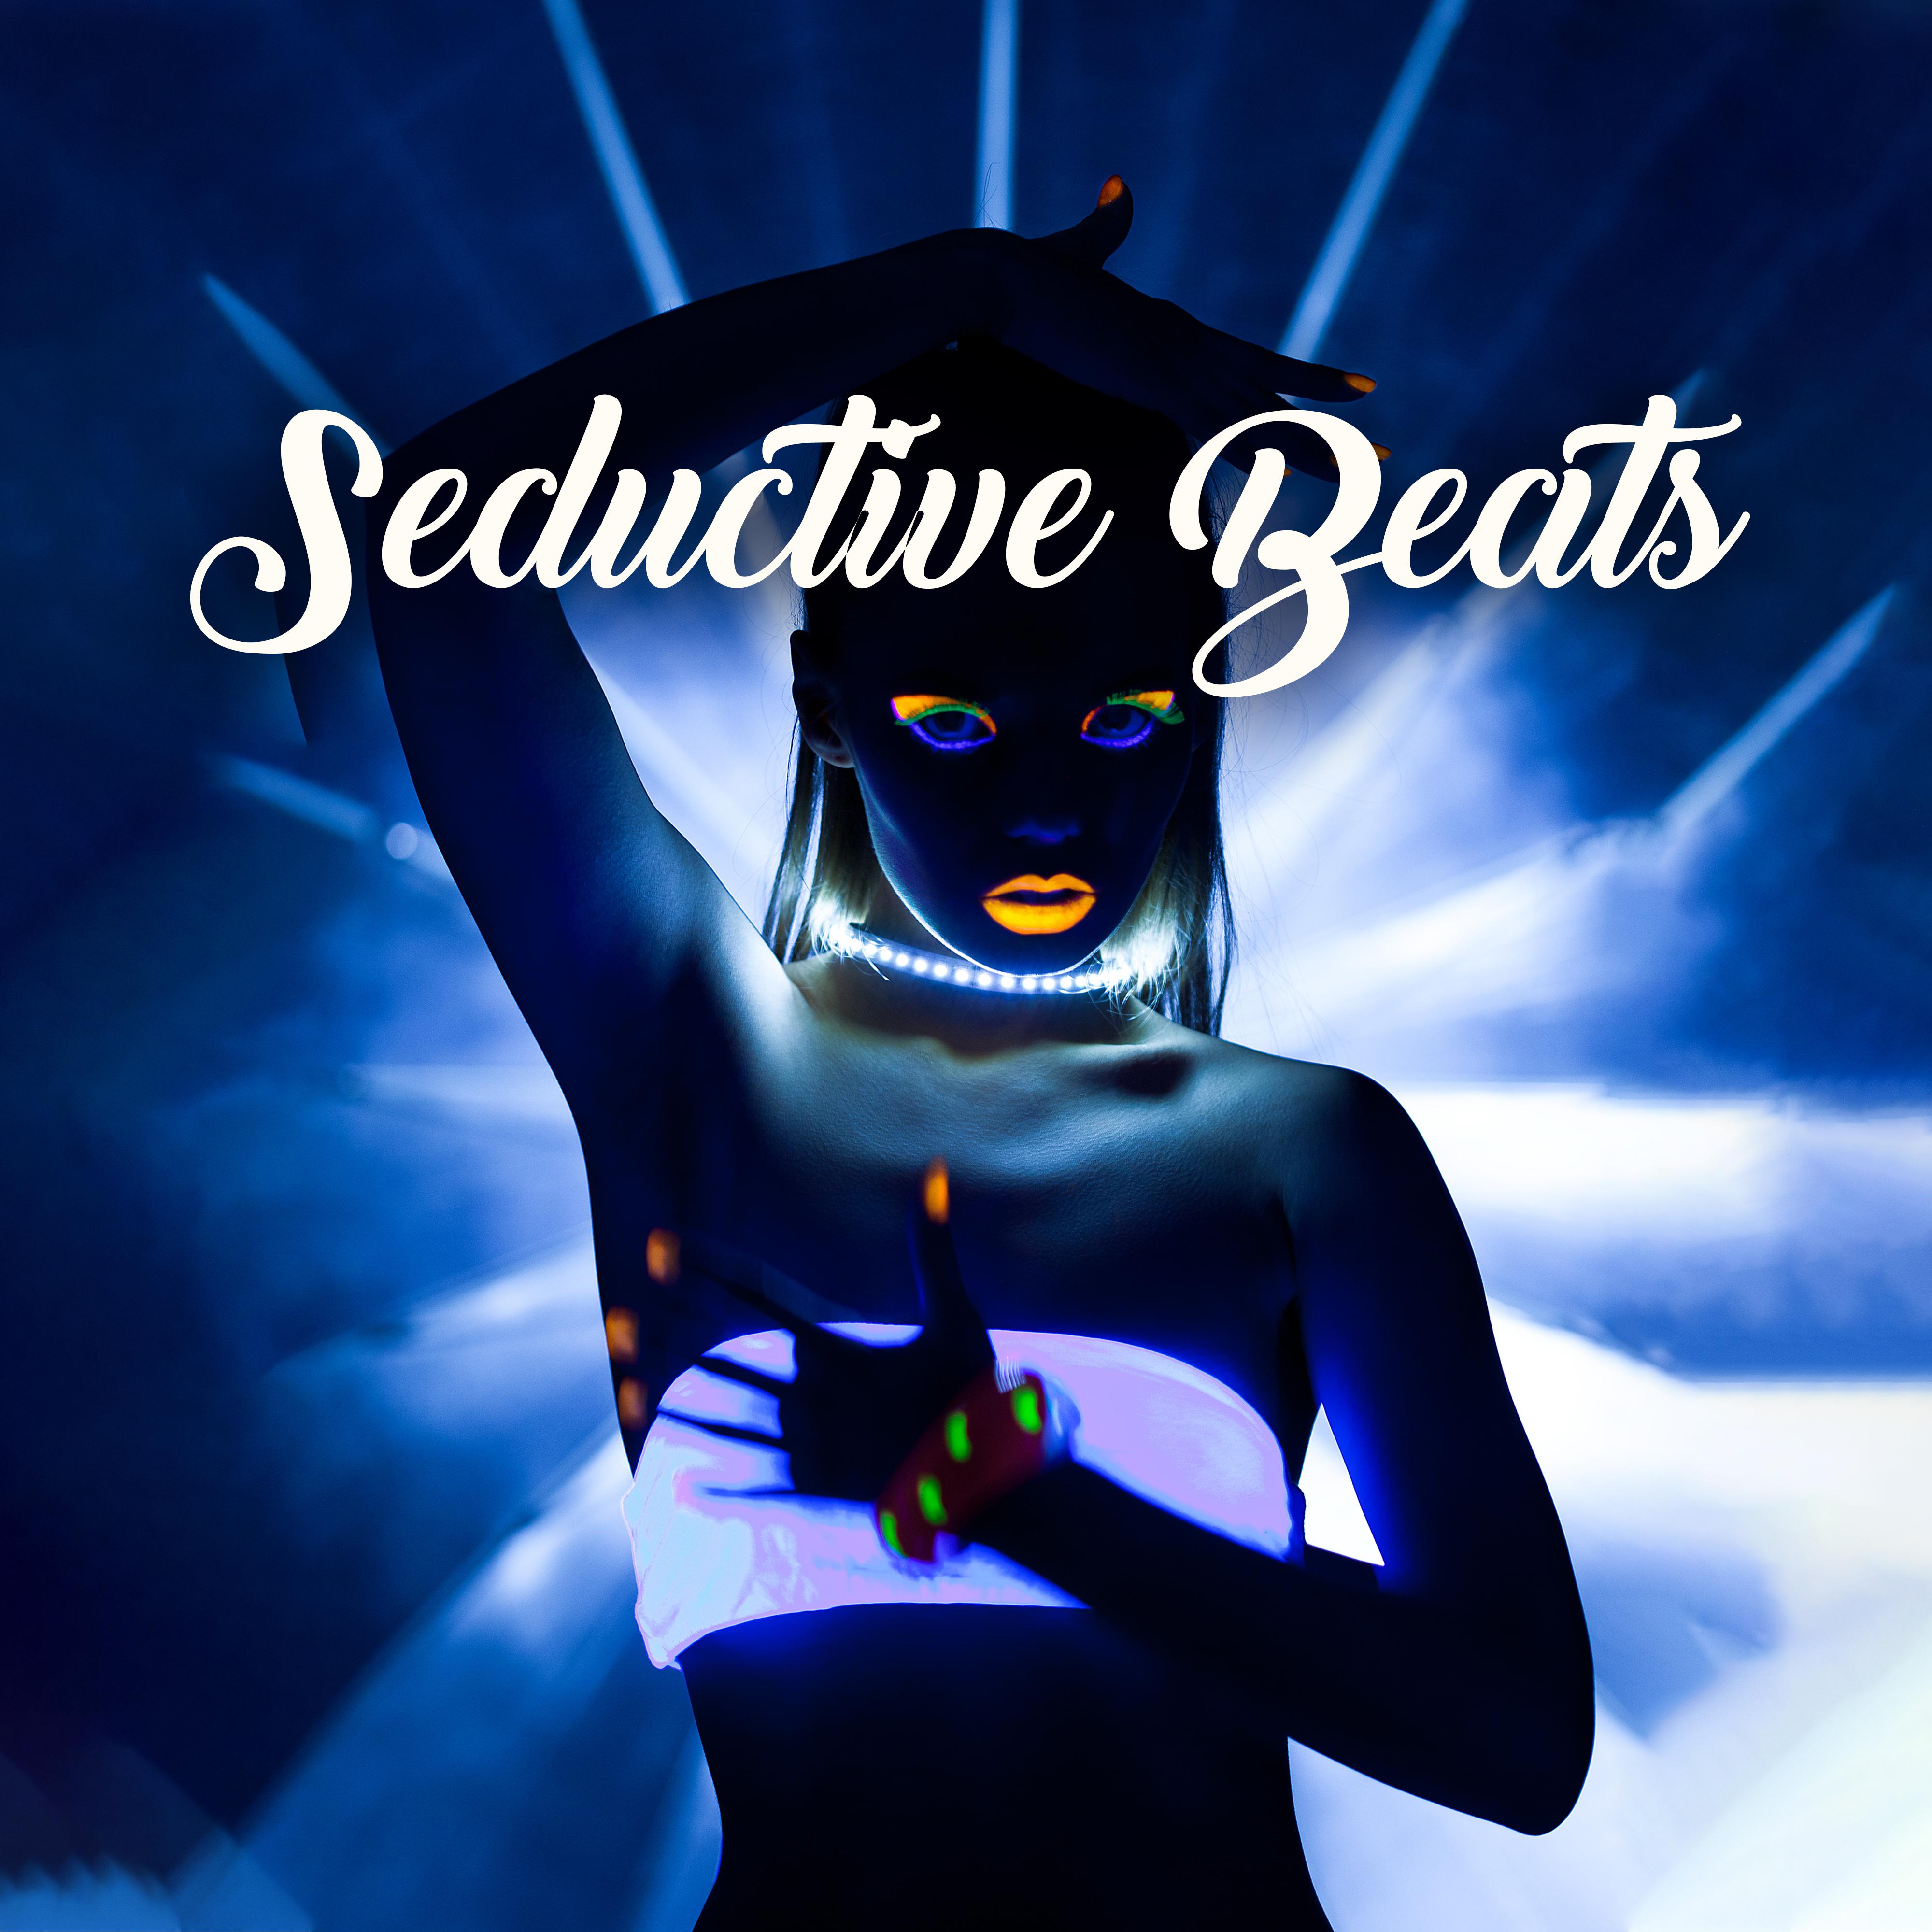 Seductive Beats - Best Chillout Tunes for a Romantic Evening, Successful Date and a Sensual Night